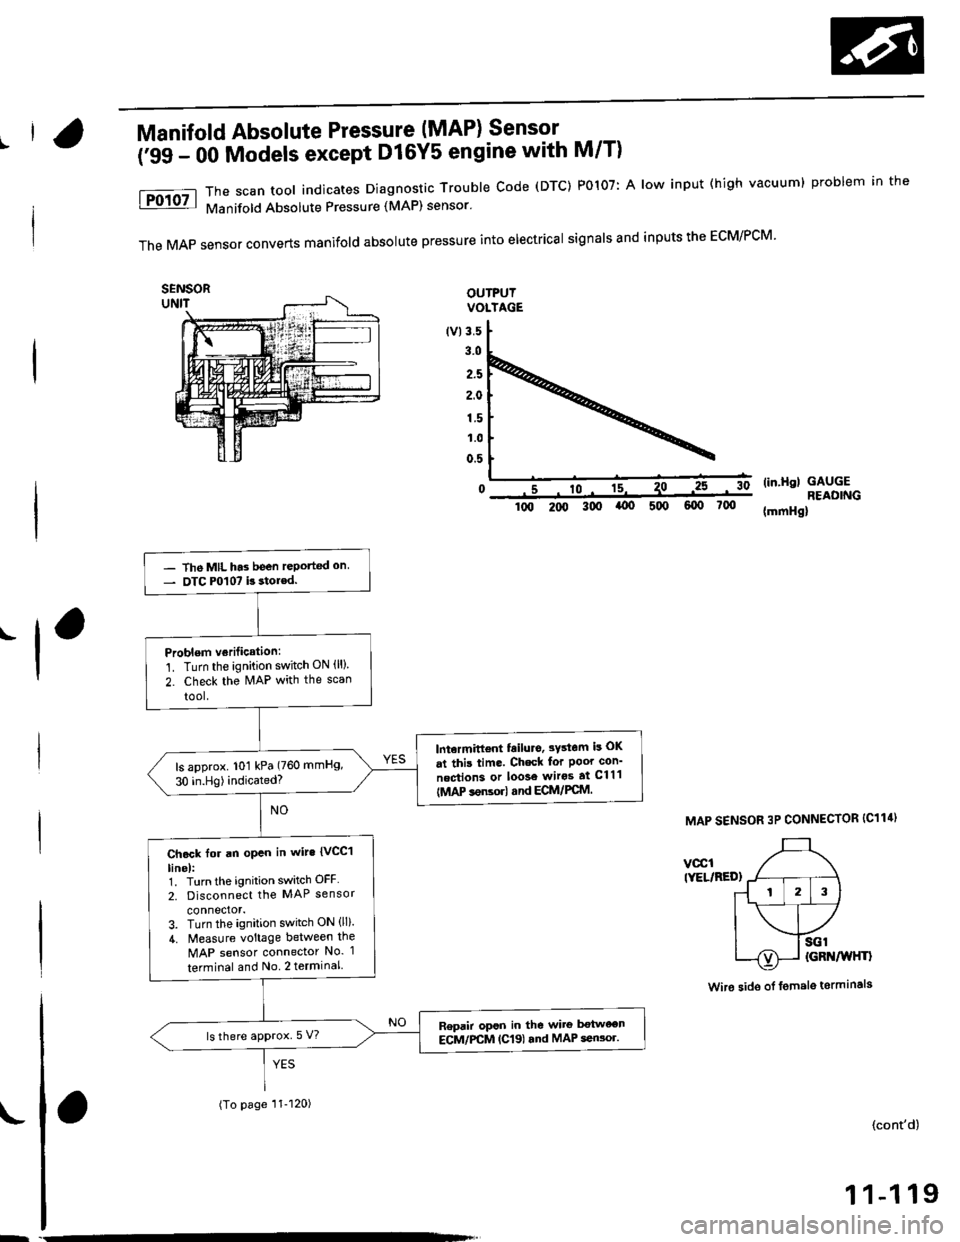 HONDA CIVIC 1996 6.G Workshop Manual |Manifold Absolute Pressure (MAP) Sensor
(;gg - OO Models except Dl6Y5 engine with M/T)
The scan tool indicates Diagnostrc Trouble Code (DTC) PO1O7: A low input (high vacuuml problem in the
Manifold 